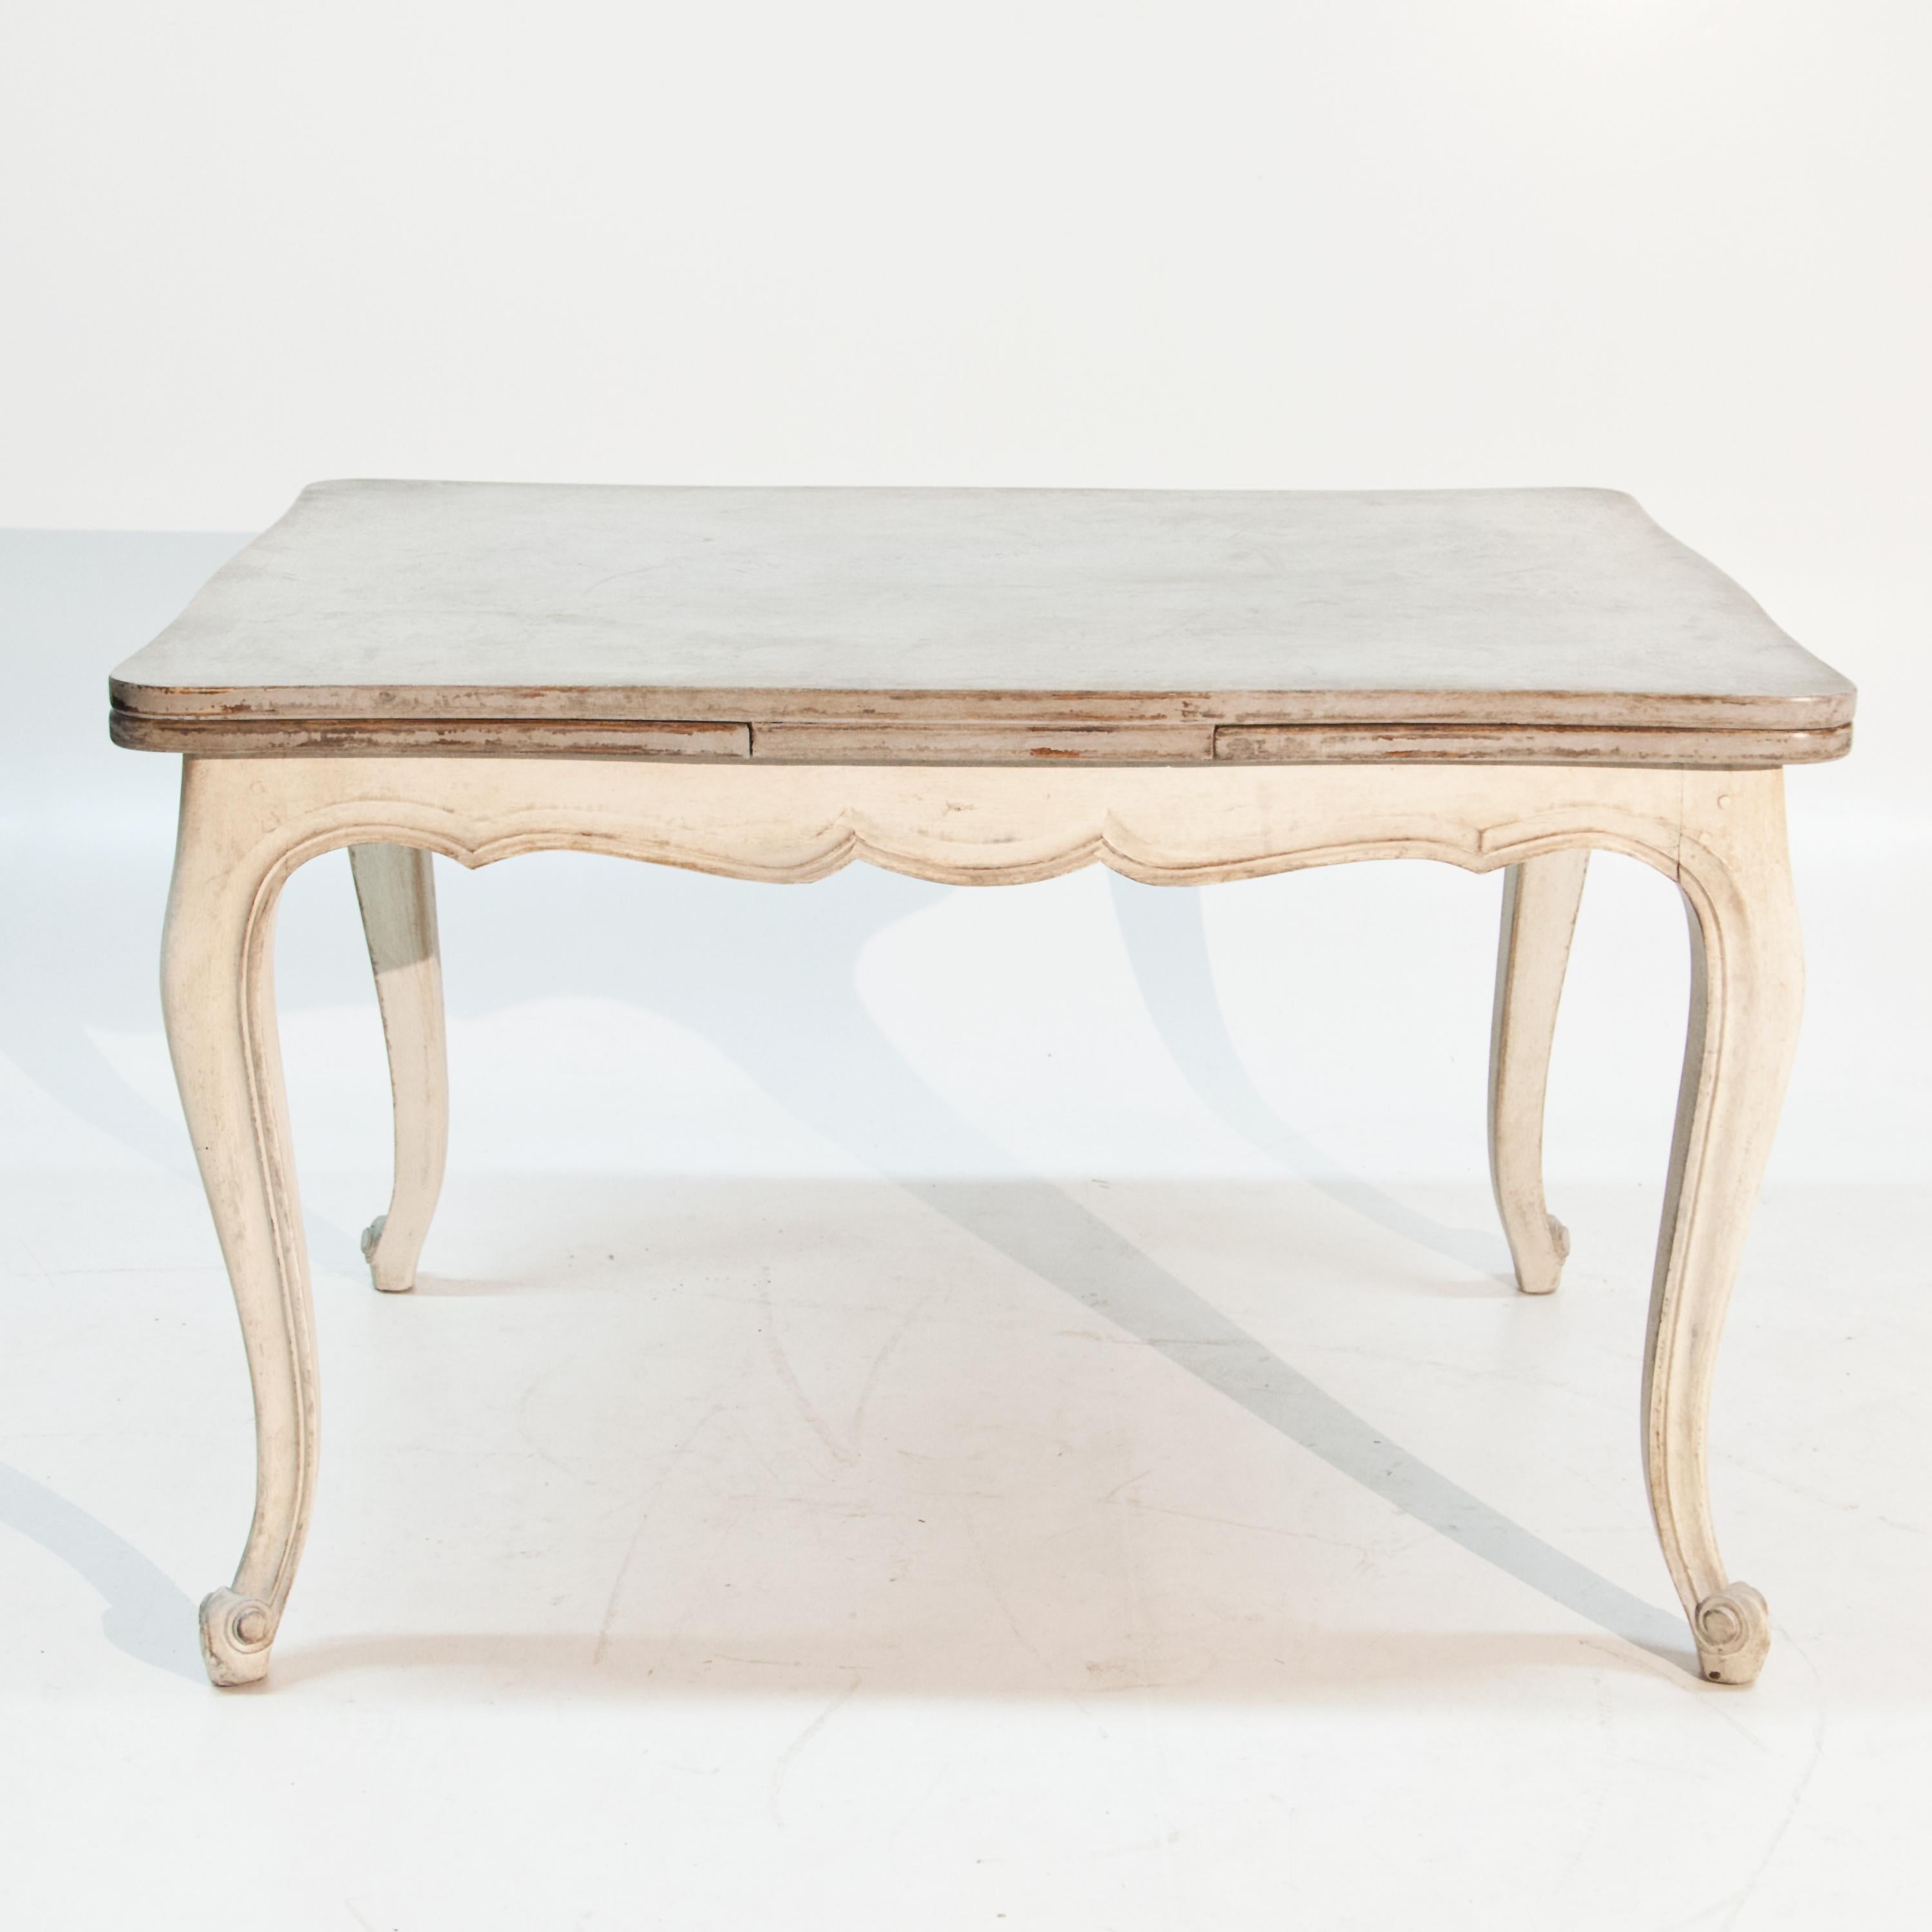 Baroque pull-out table on S-shaped legs with curved frame and tabletop. The table has been newly set in grey-beige and given an antique patina.